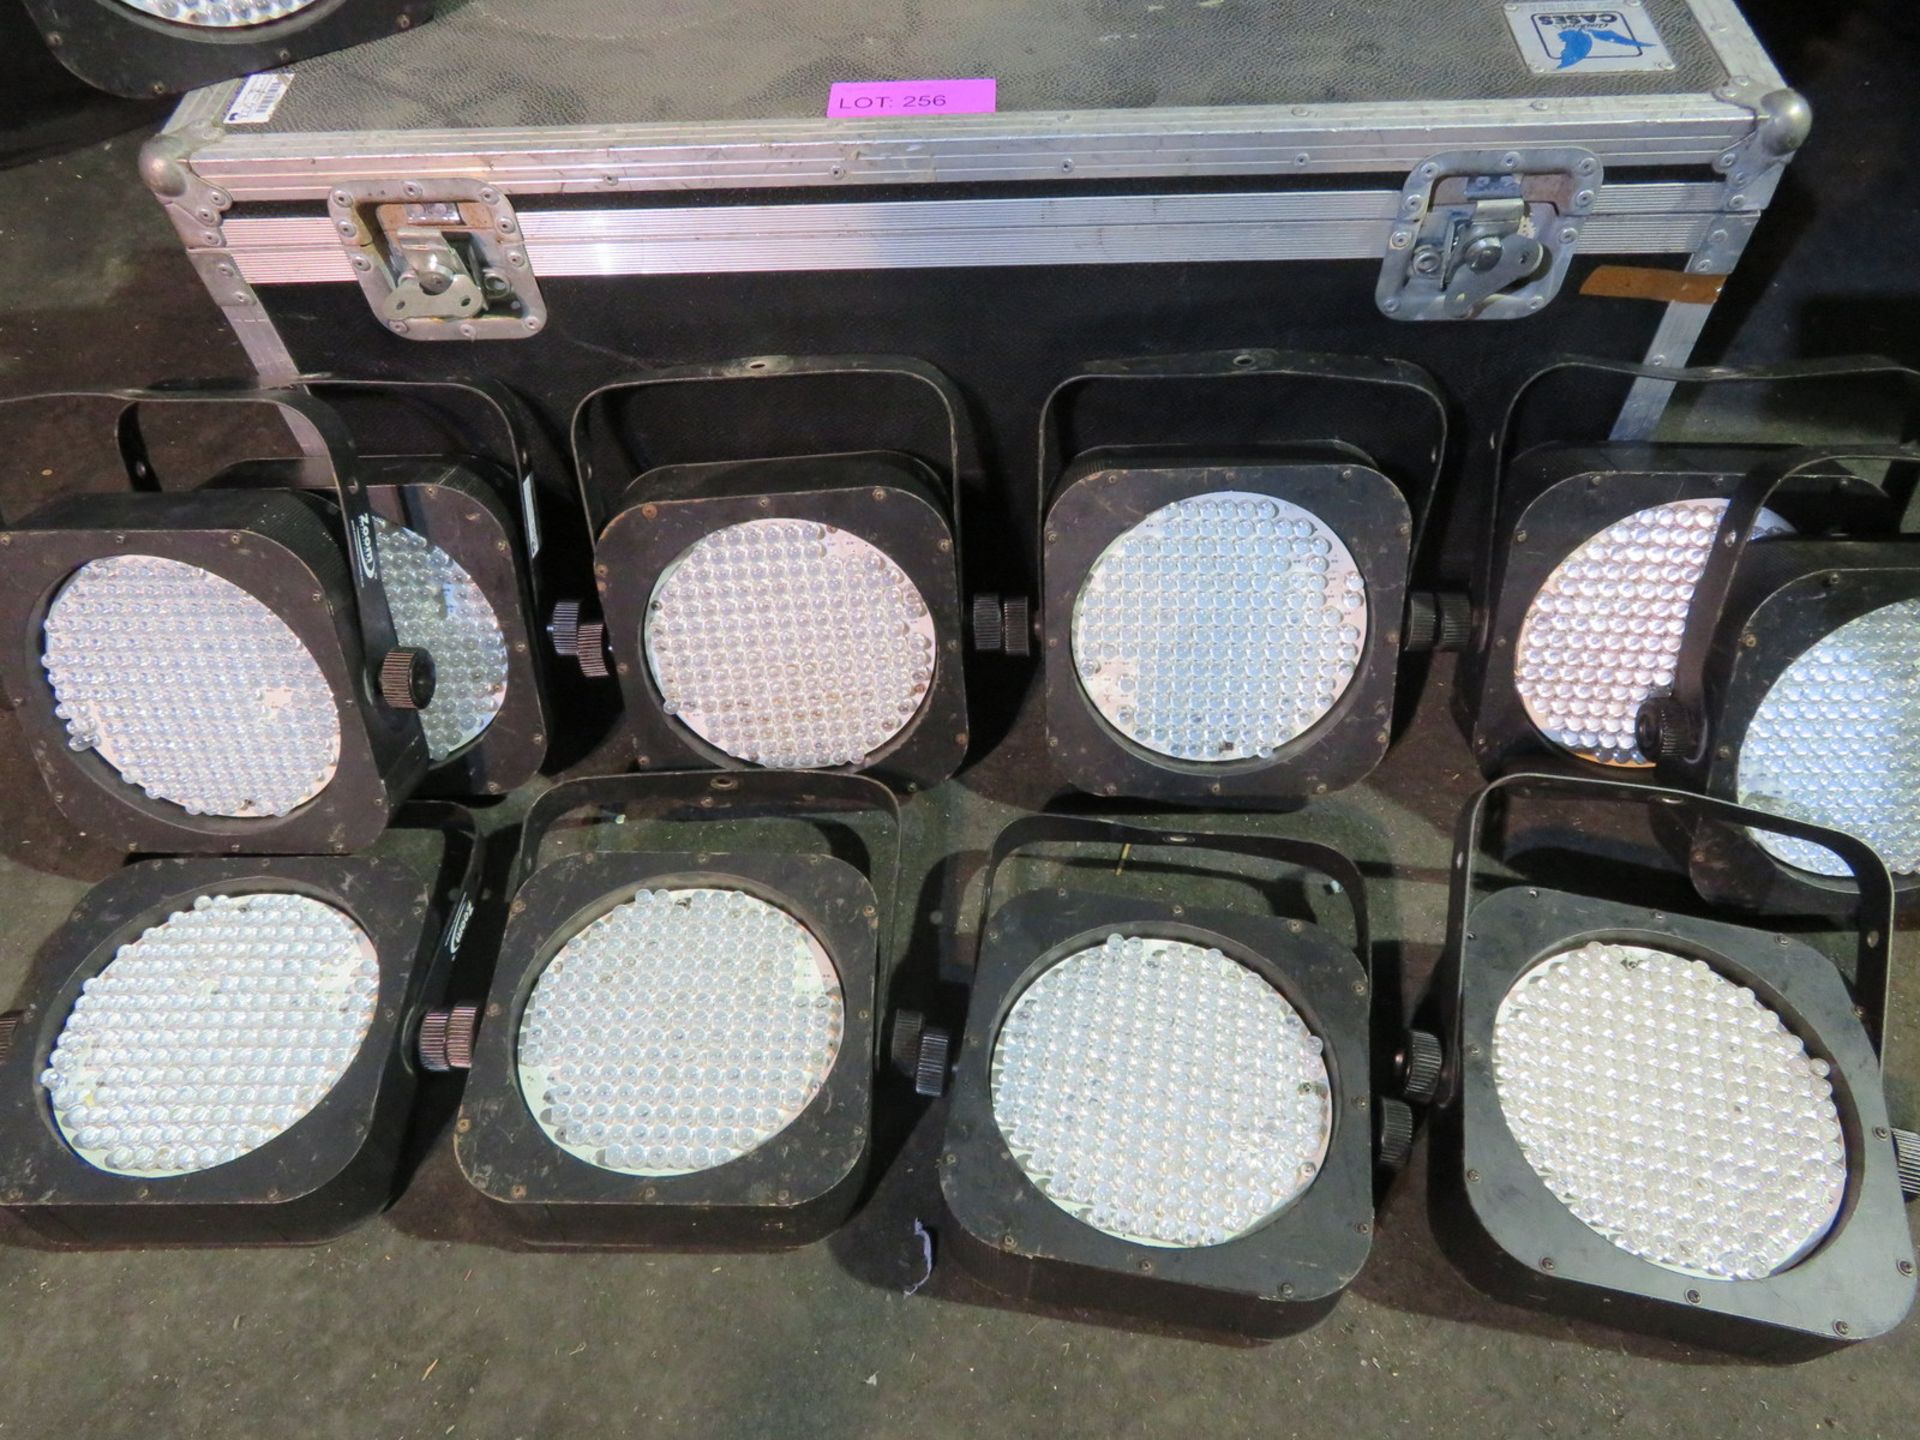 14x LED technologies Zoom flat LED par cans. Some with LEDs missing. Comes in flightcase - Image 3 of 8